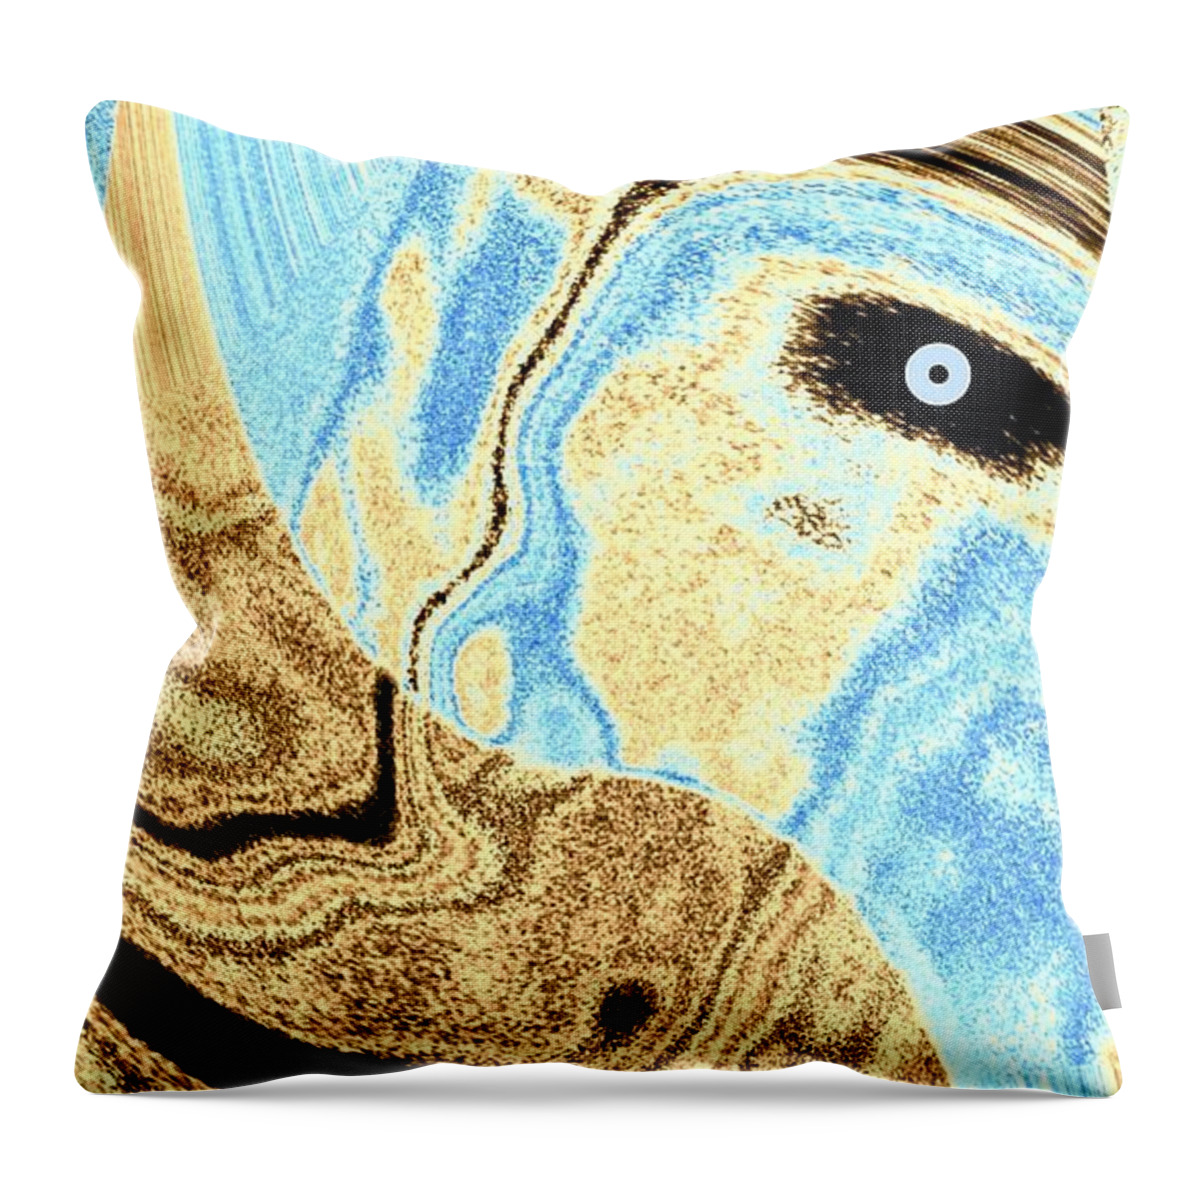 Masked- Man Abstract Throw Pillow featuring the digital art Masked- Man Abstract by Will Borden